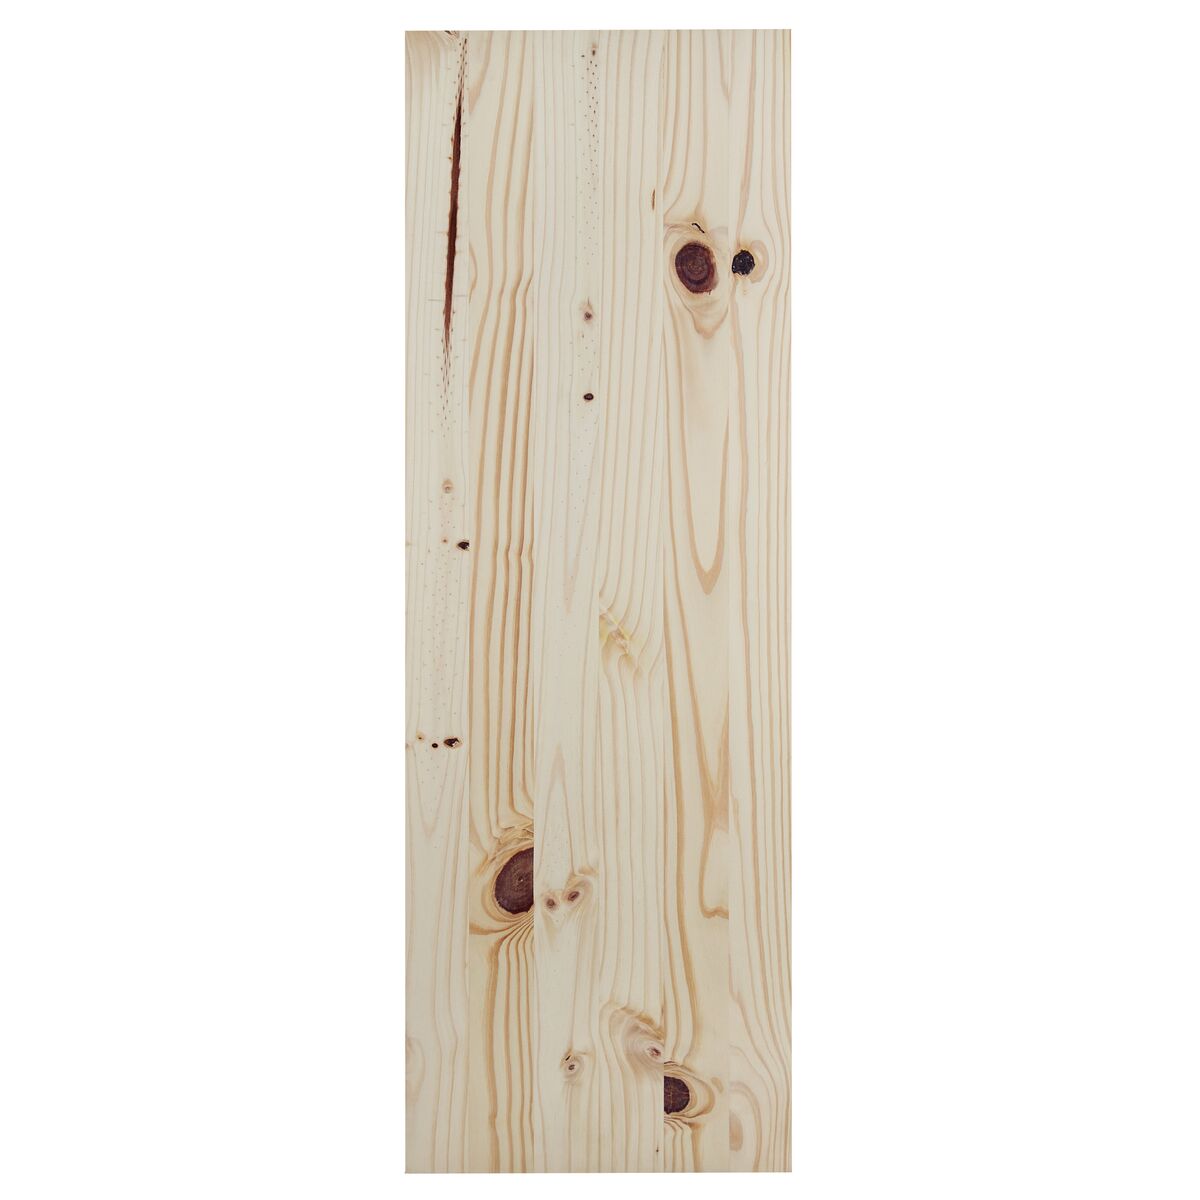 Tramontina Modulare CC 1000x300x18 mm Pine Wood Panel with a Natural Finish